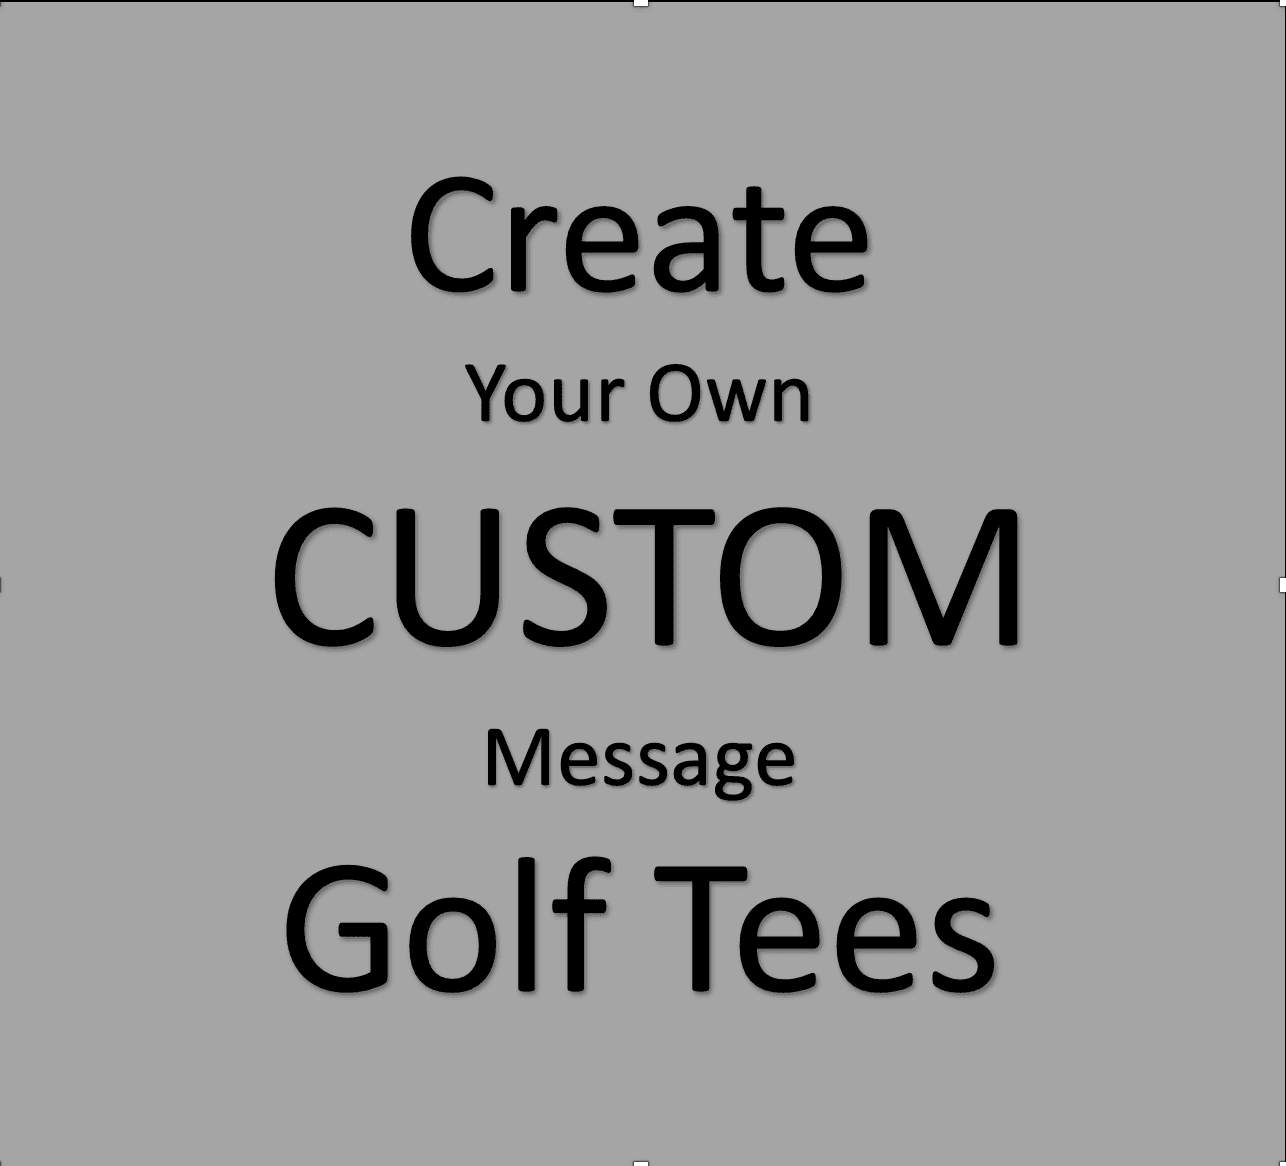 Personalized Golf Tees Set of 6 Golf Tees - Unique Engravings for a Custom Touch! Great for Business Charity Sporting Events - Ready to Gift